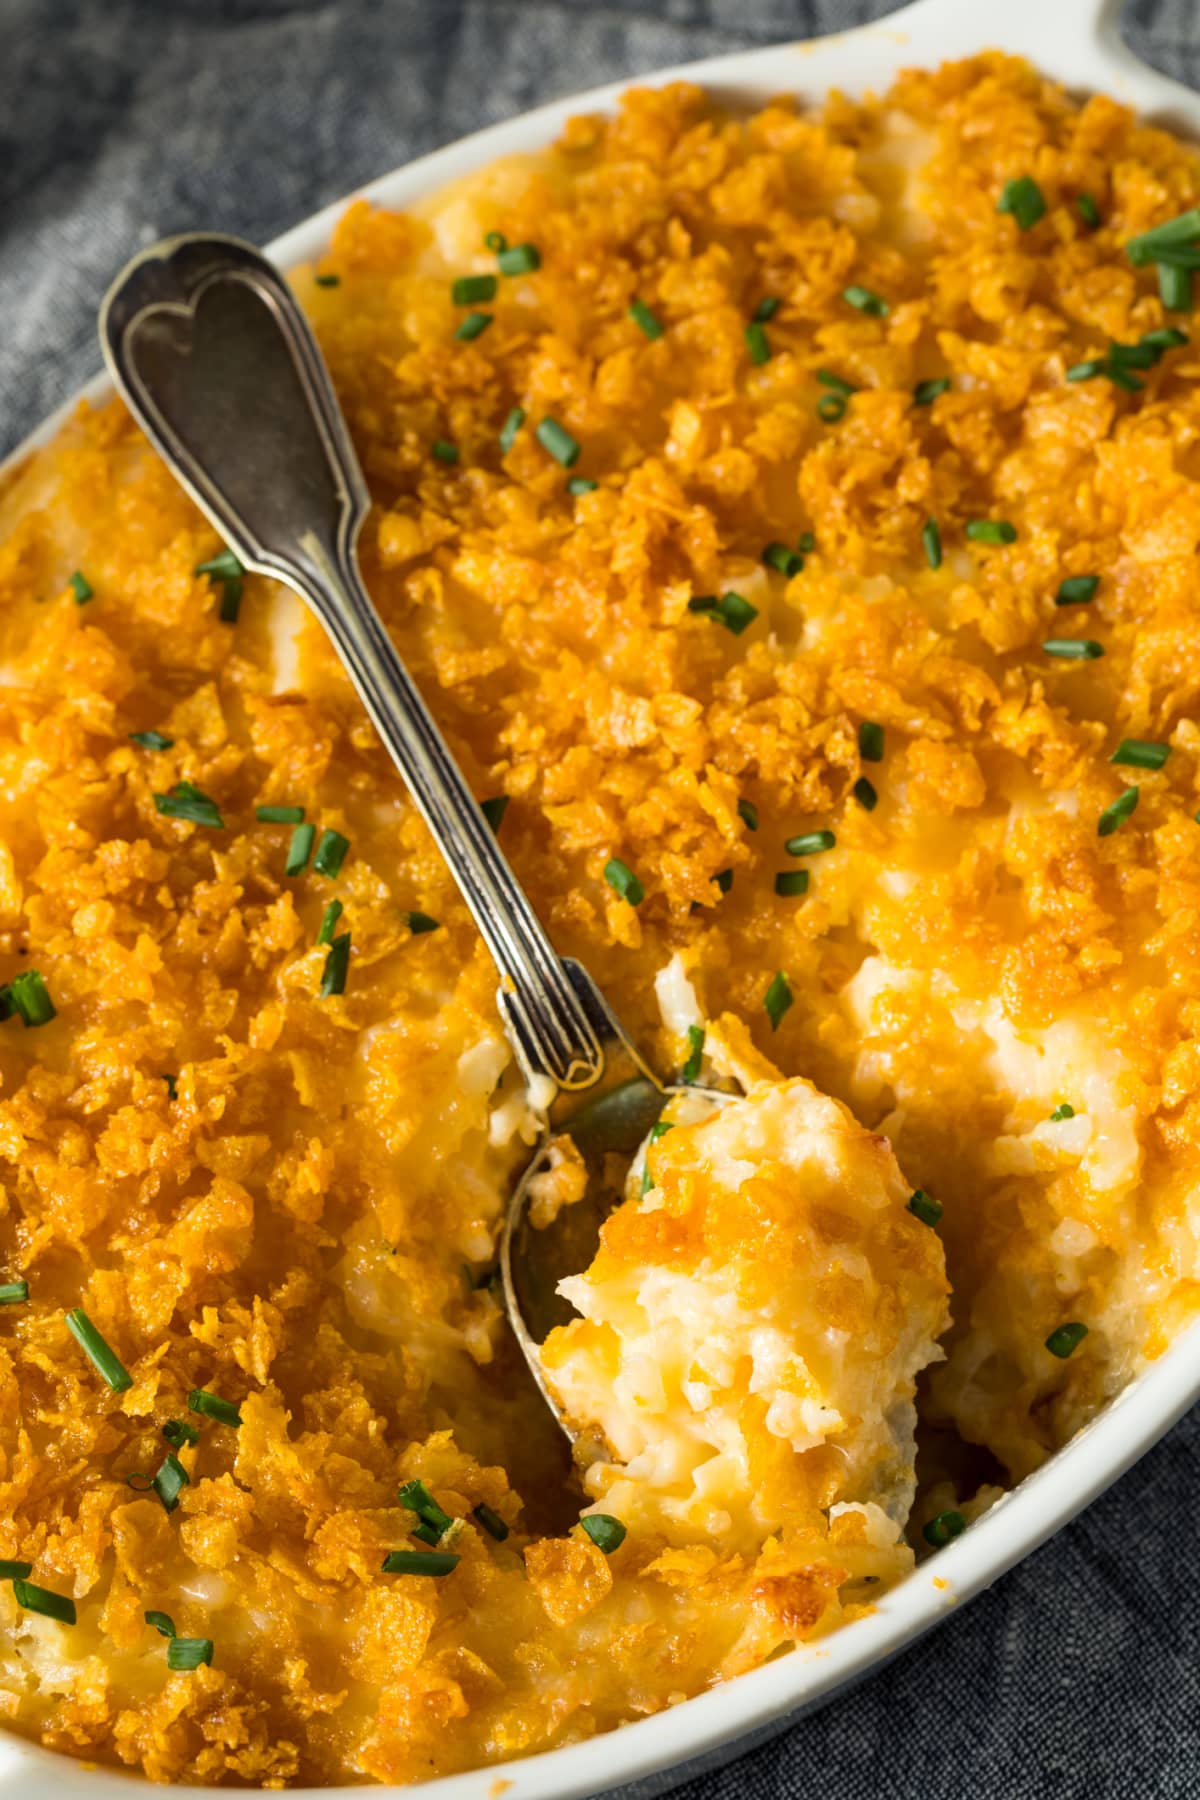 Homemade Funeral Potatoes Casserole with Cheese and Chives